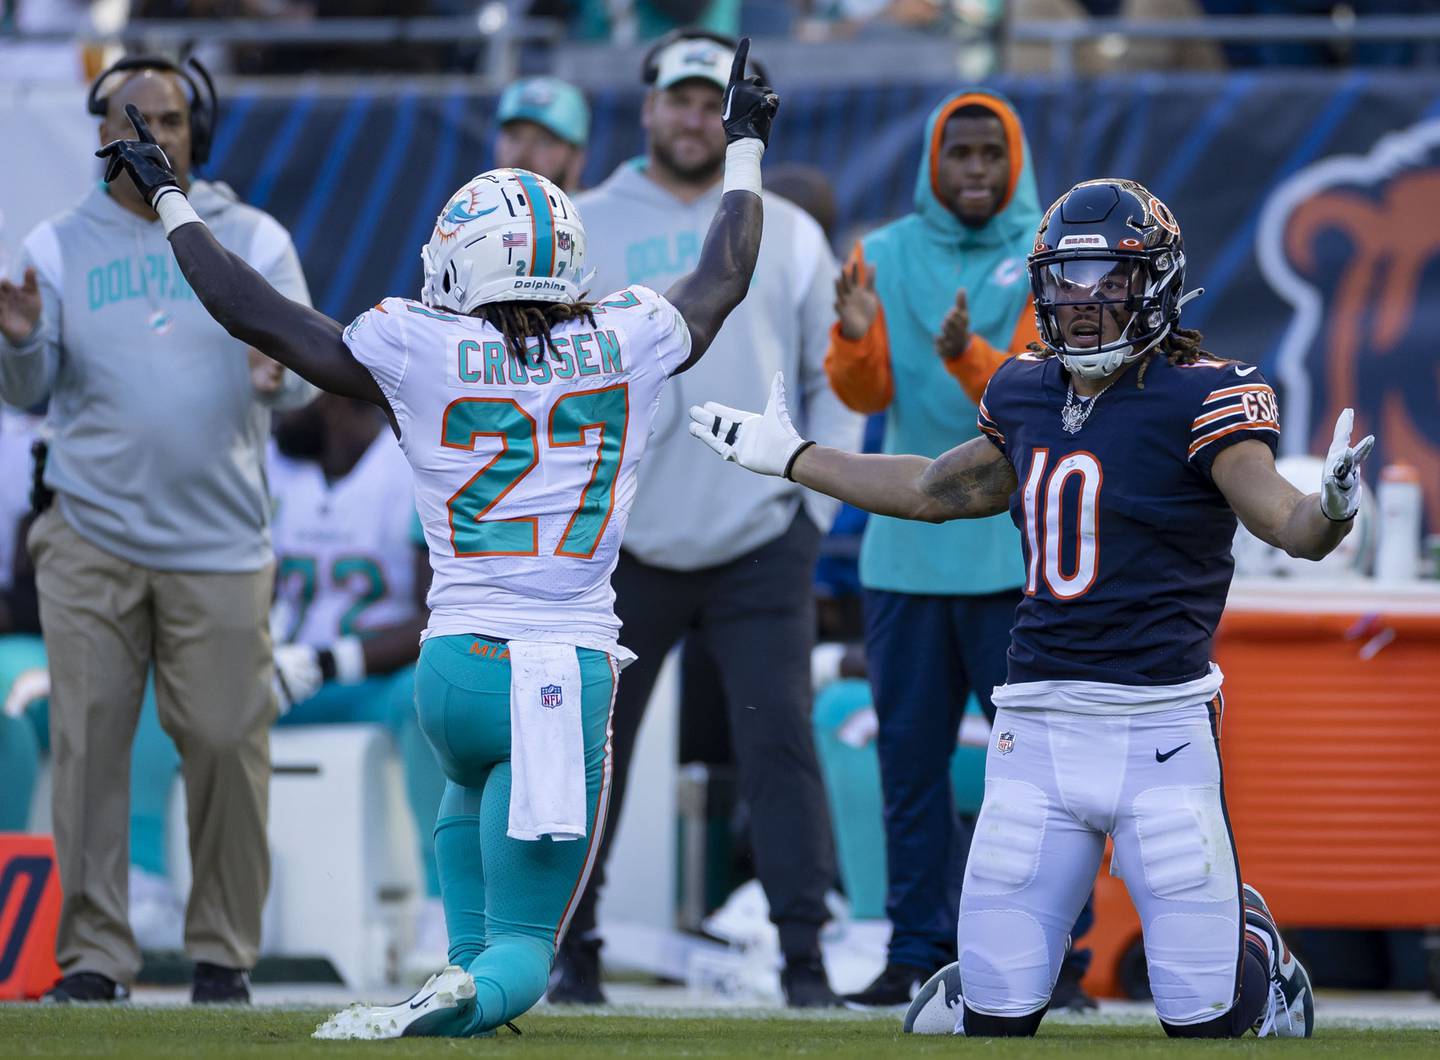 Bears wide receiver Chase Claypool looks for a flag as Dolphins cornerback Keion Crossen celebrates a stop late in the fourth quarter on Nov. 6, 2022, at Soldier Field.